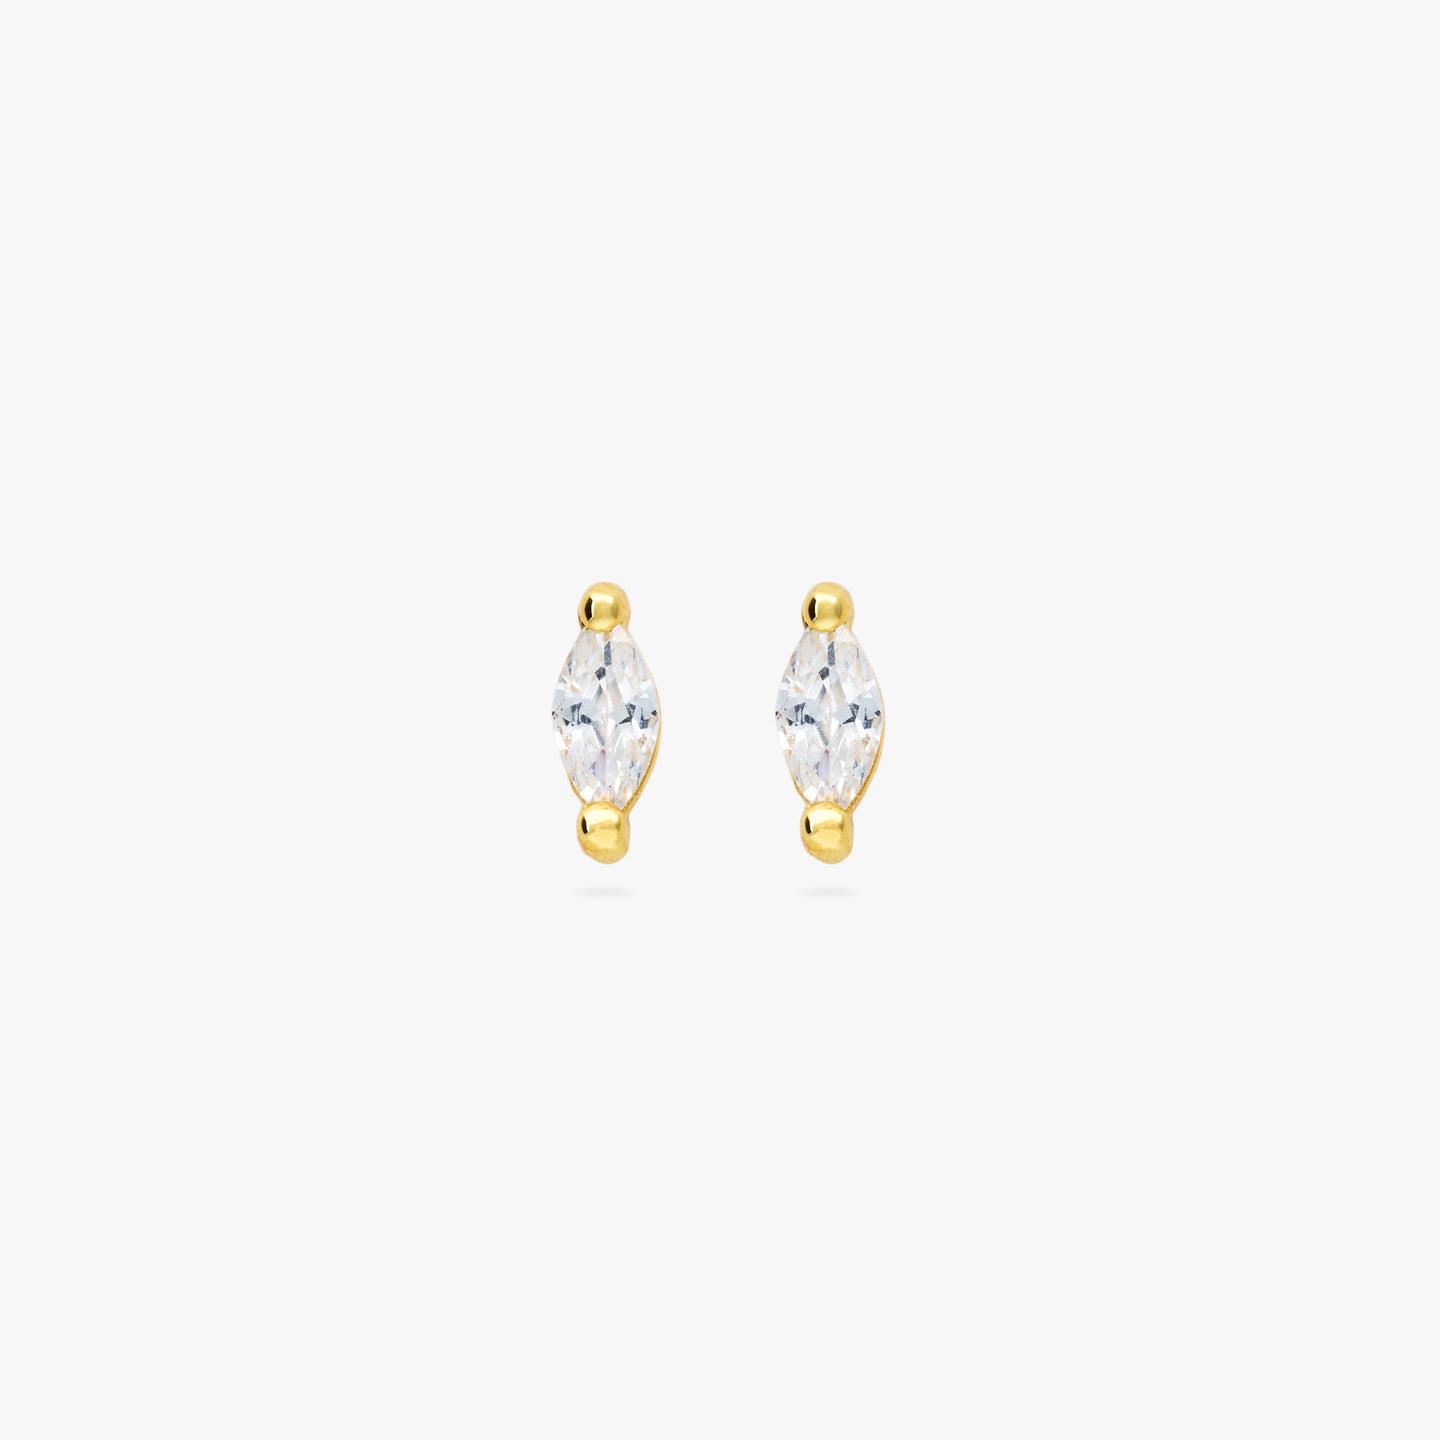 This is a pair of marquise mini studs featuring clear oblong shaped gems and has gold accents. [pair] color:null|gold/clear